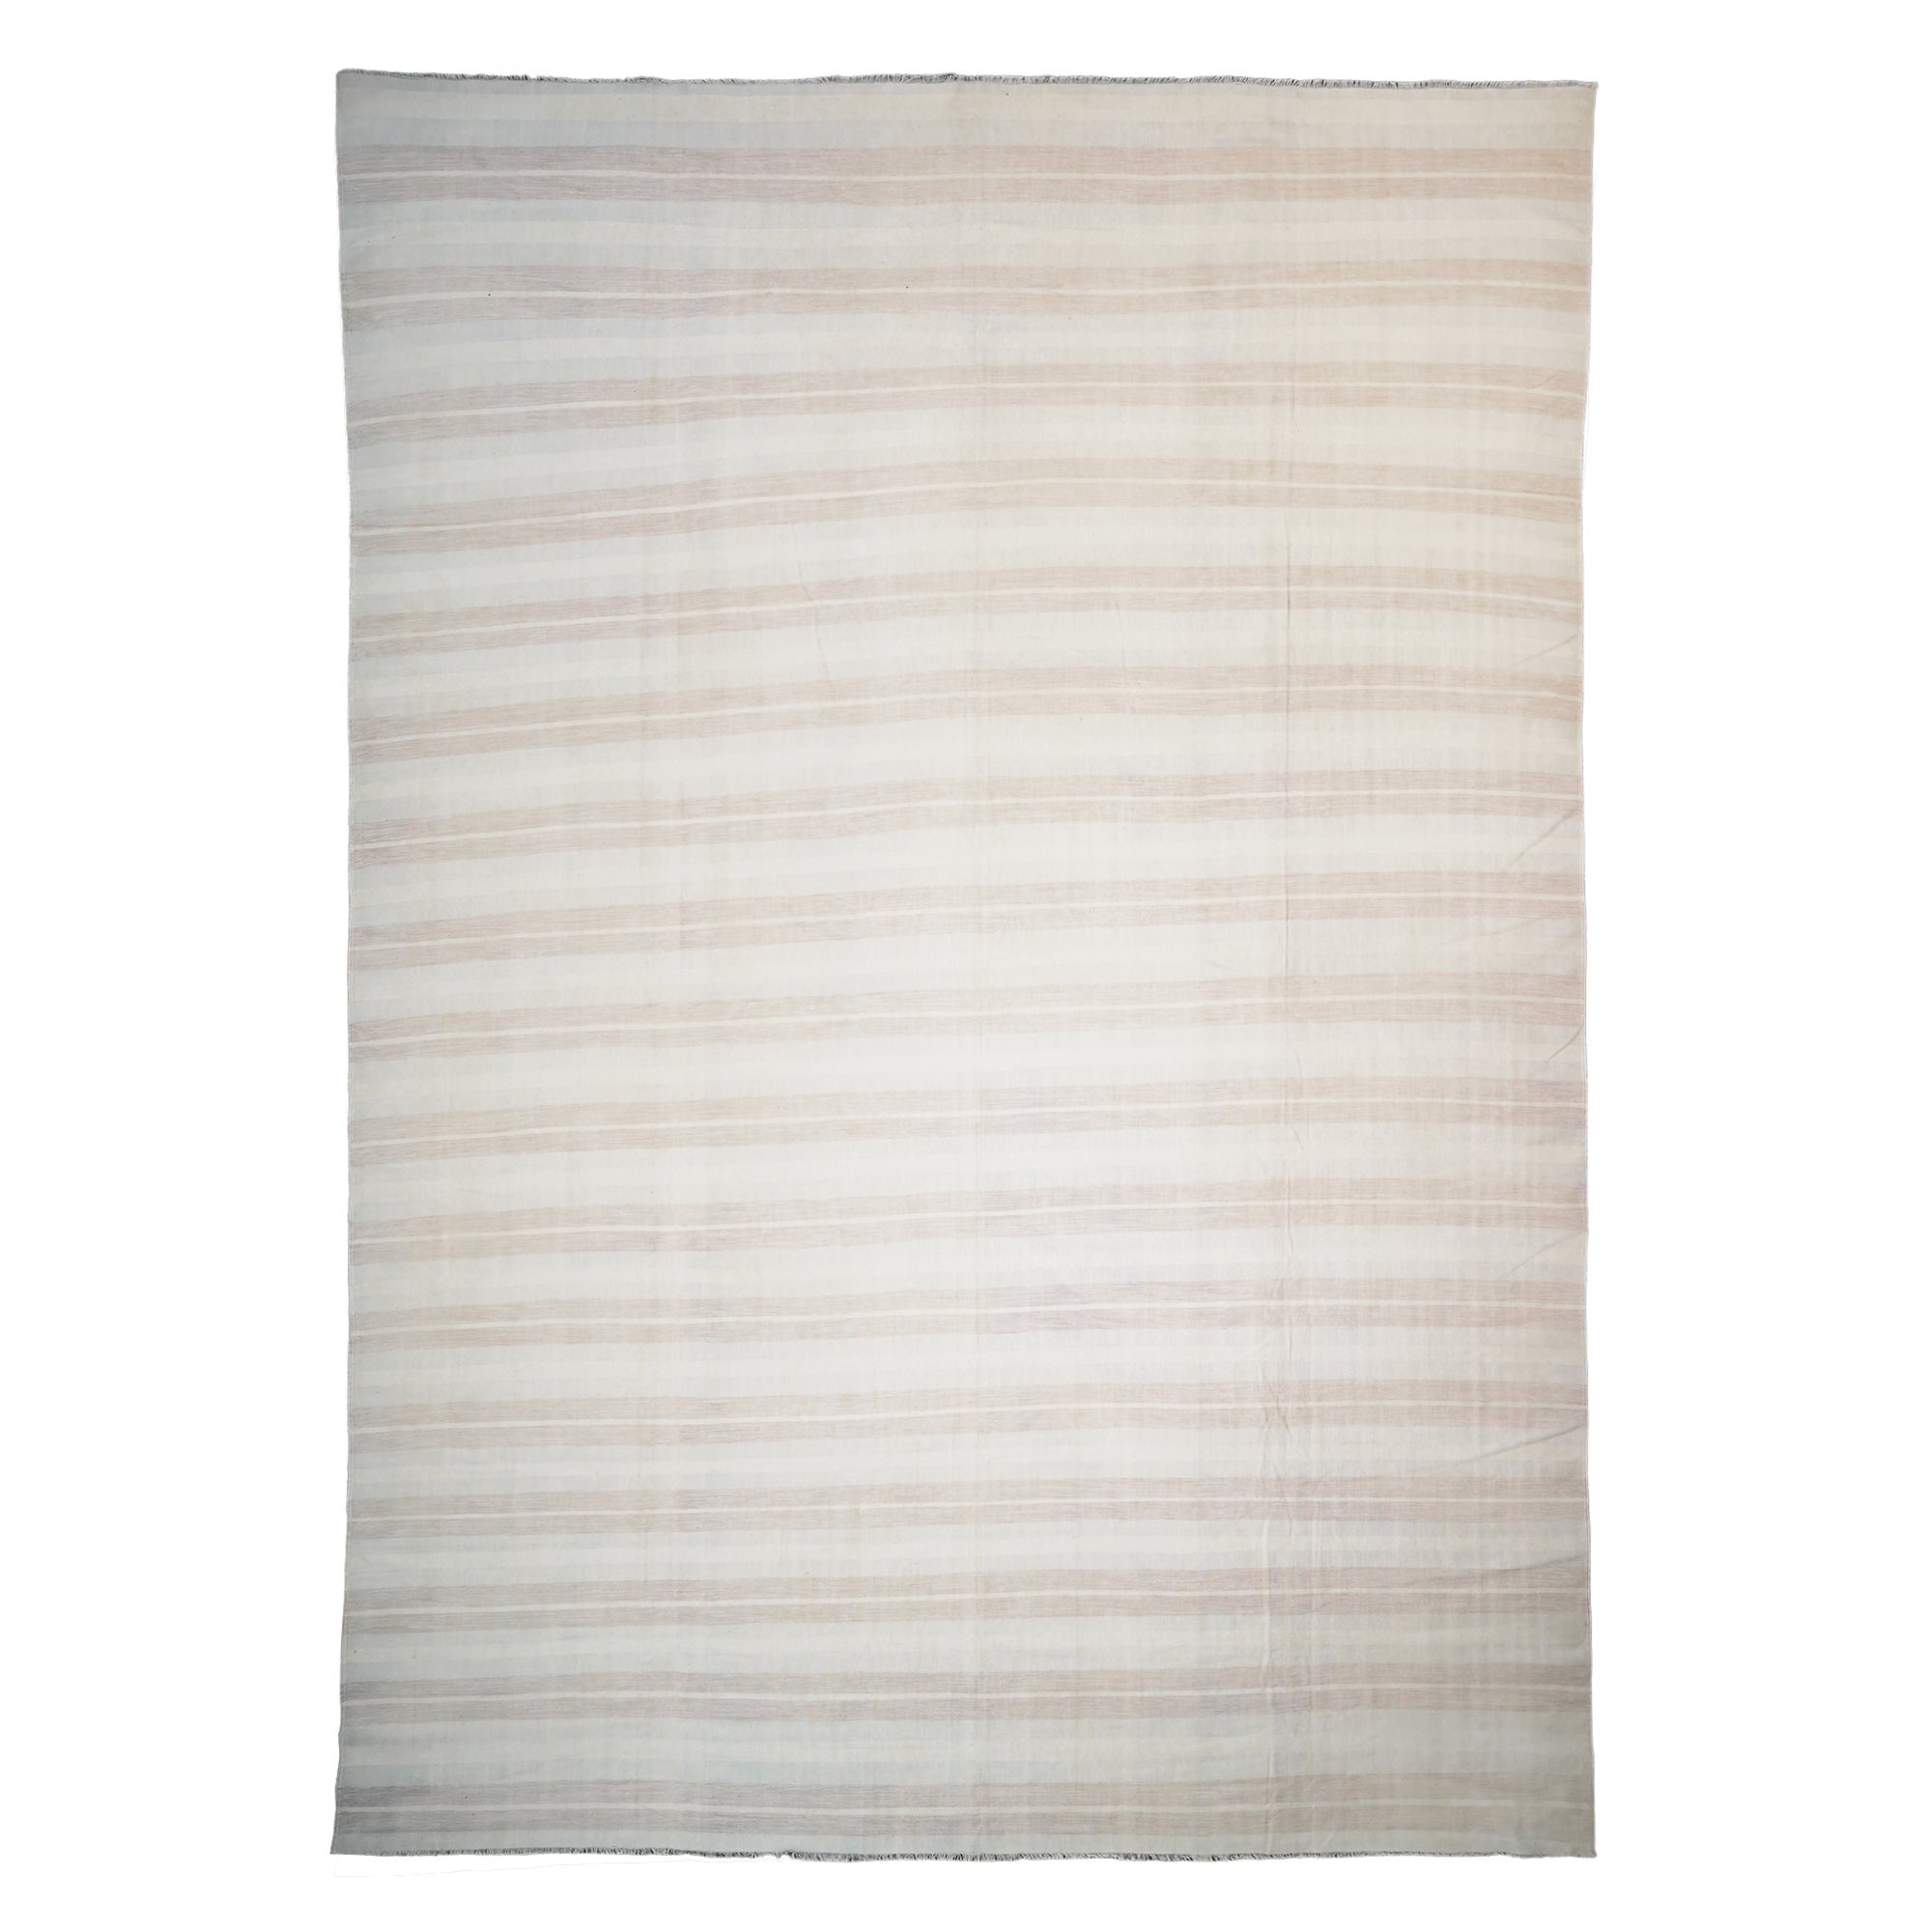 Vintage Dhurrie Rug with Stripes, from Rug & Kilim For Sale